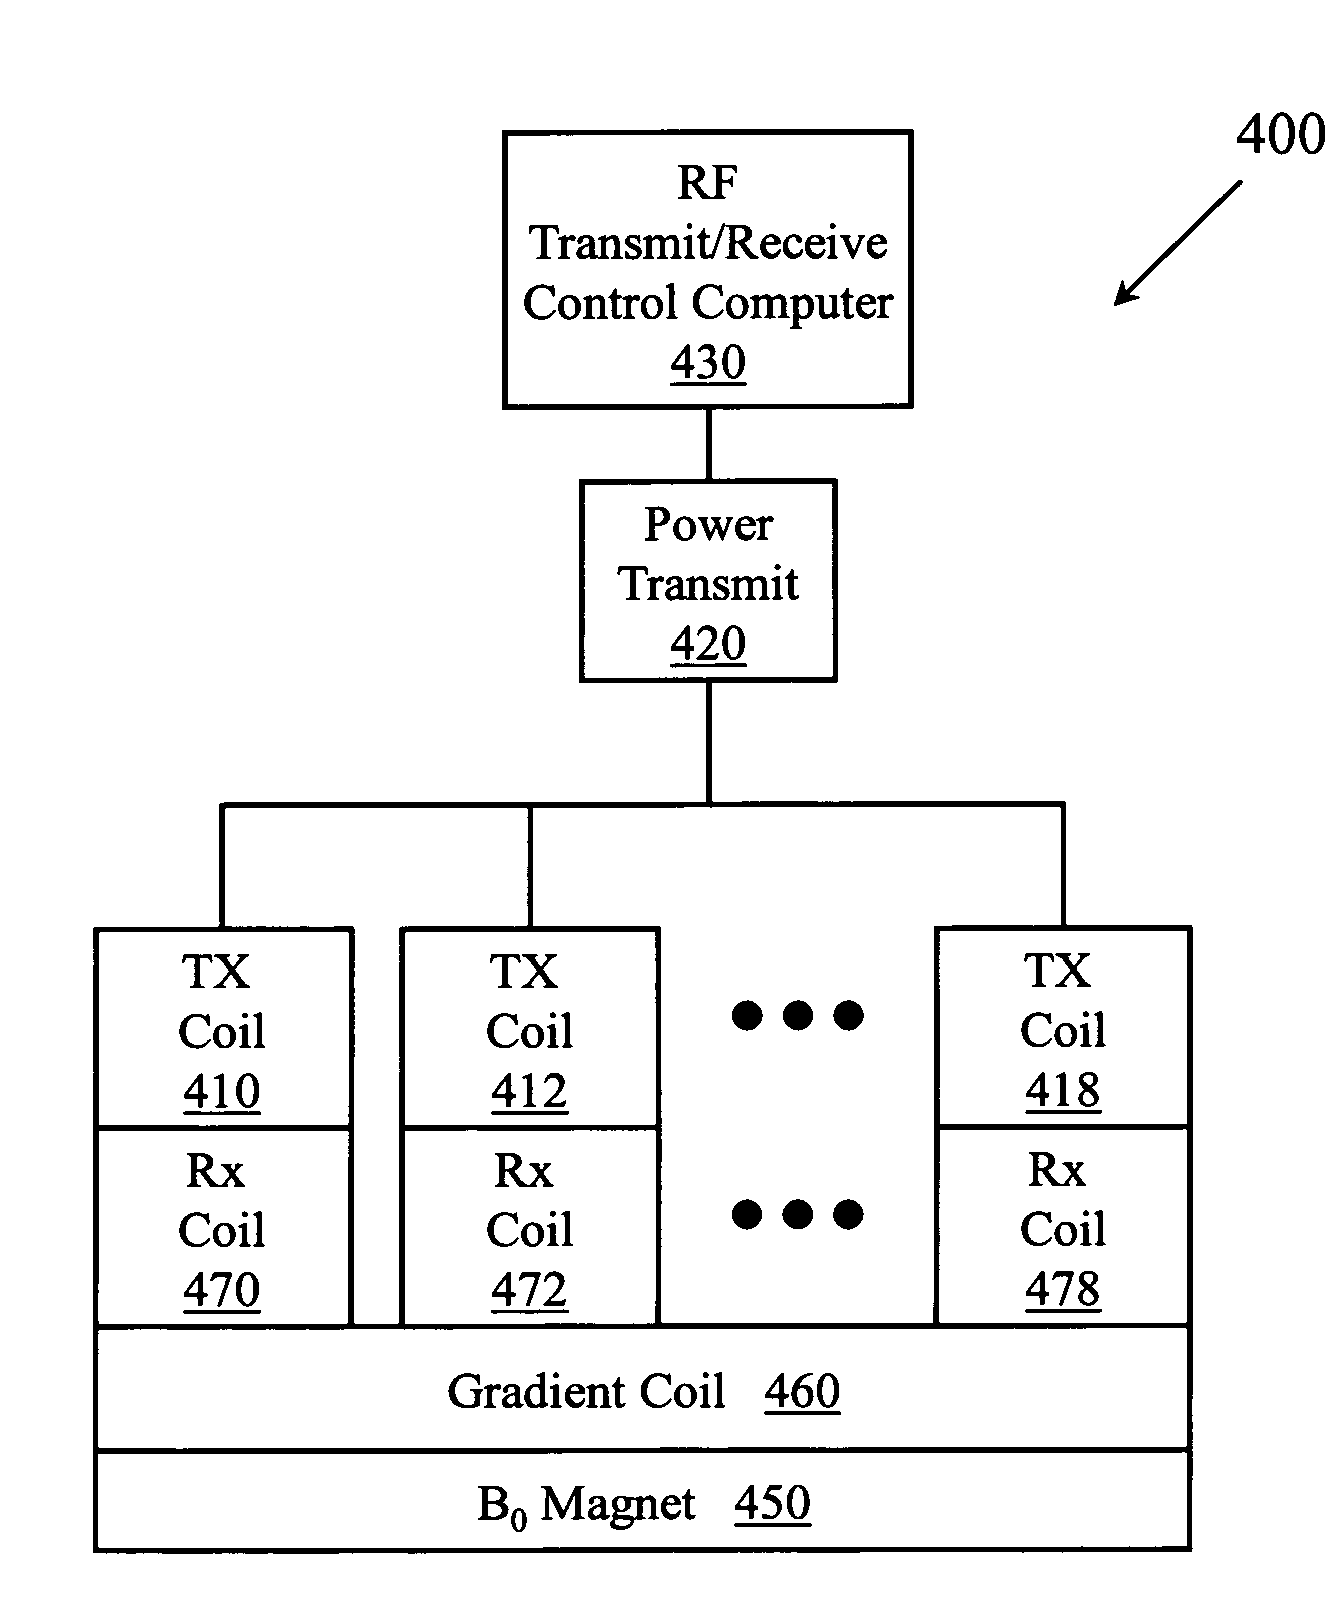 On-coil switched mode amplifier for parallel transmission in MRI